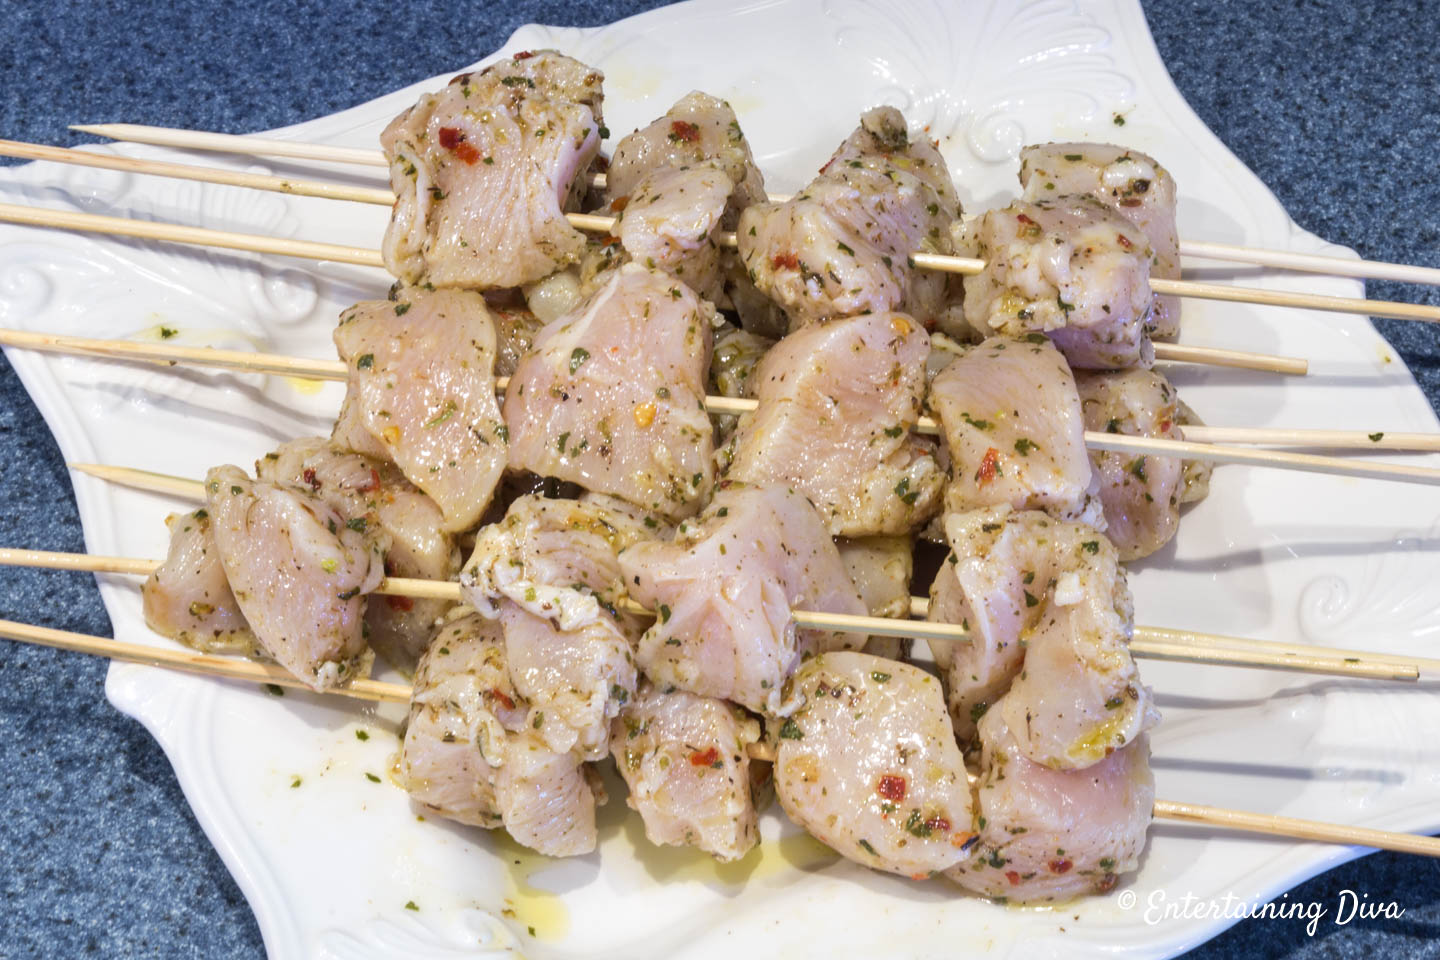 Chicken on shish kabob skewers before grilling